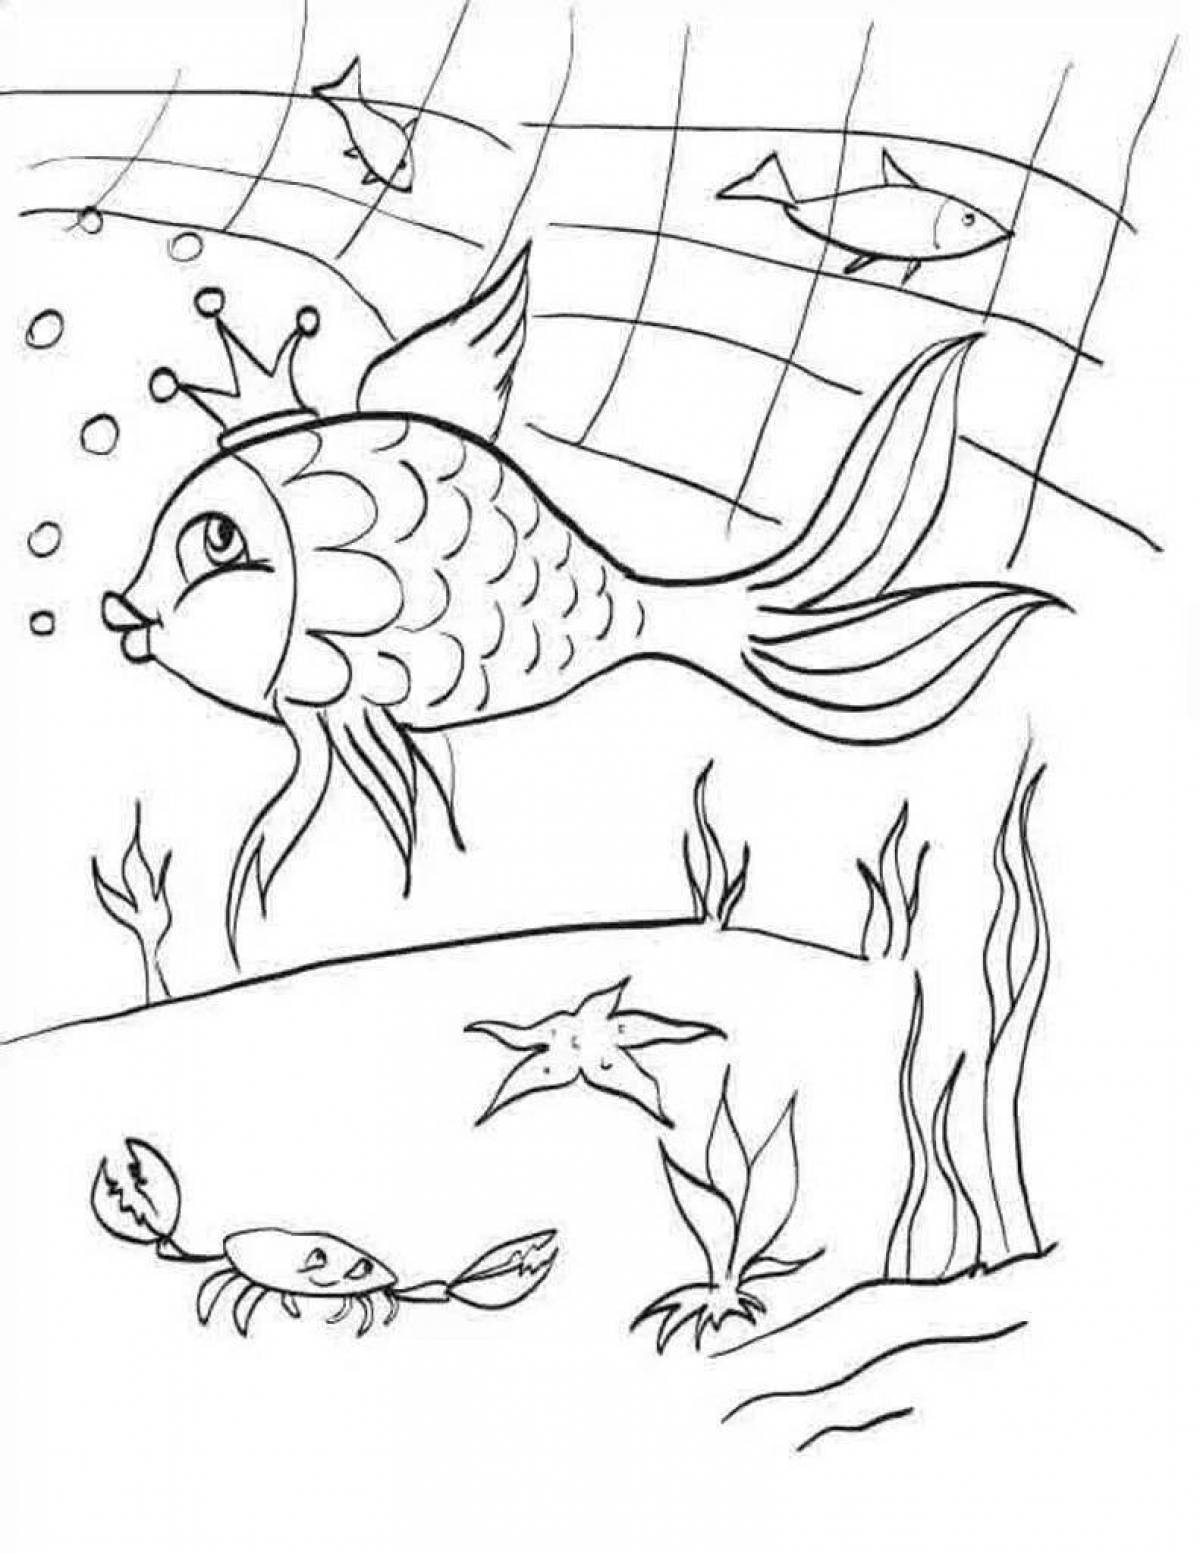 Colorful coloring book for the tale of the fisherman and the fish